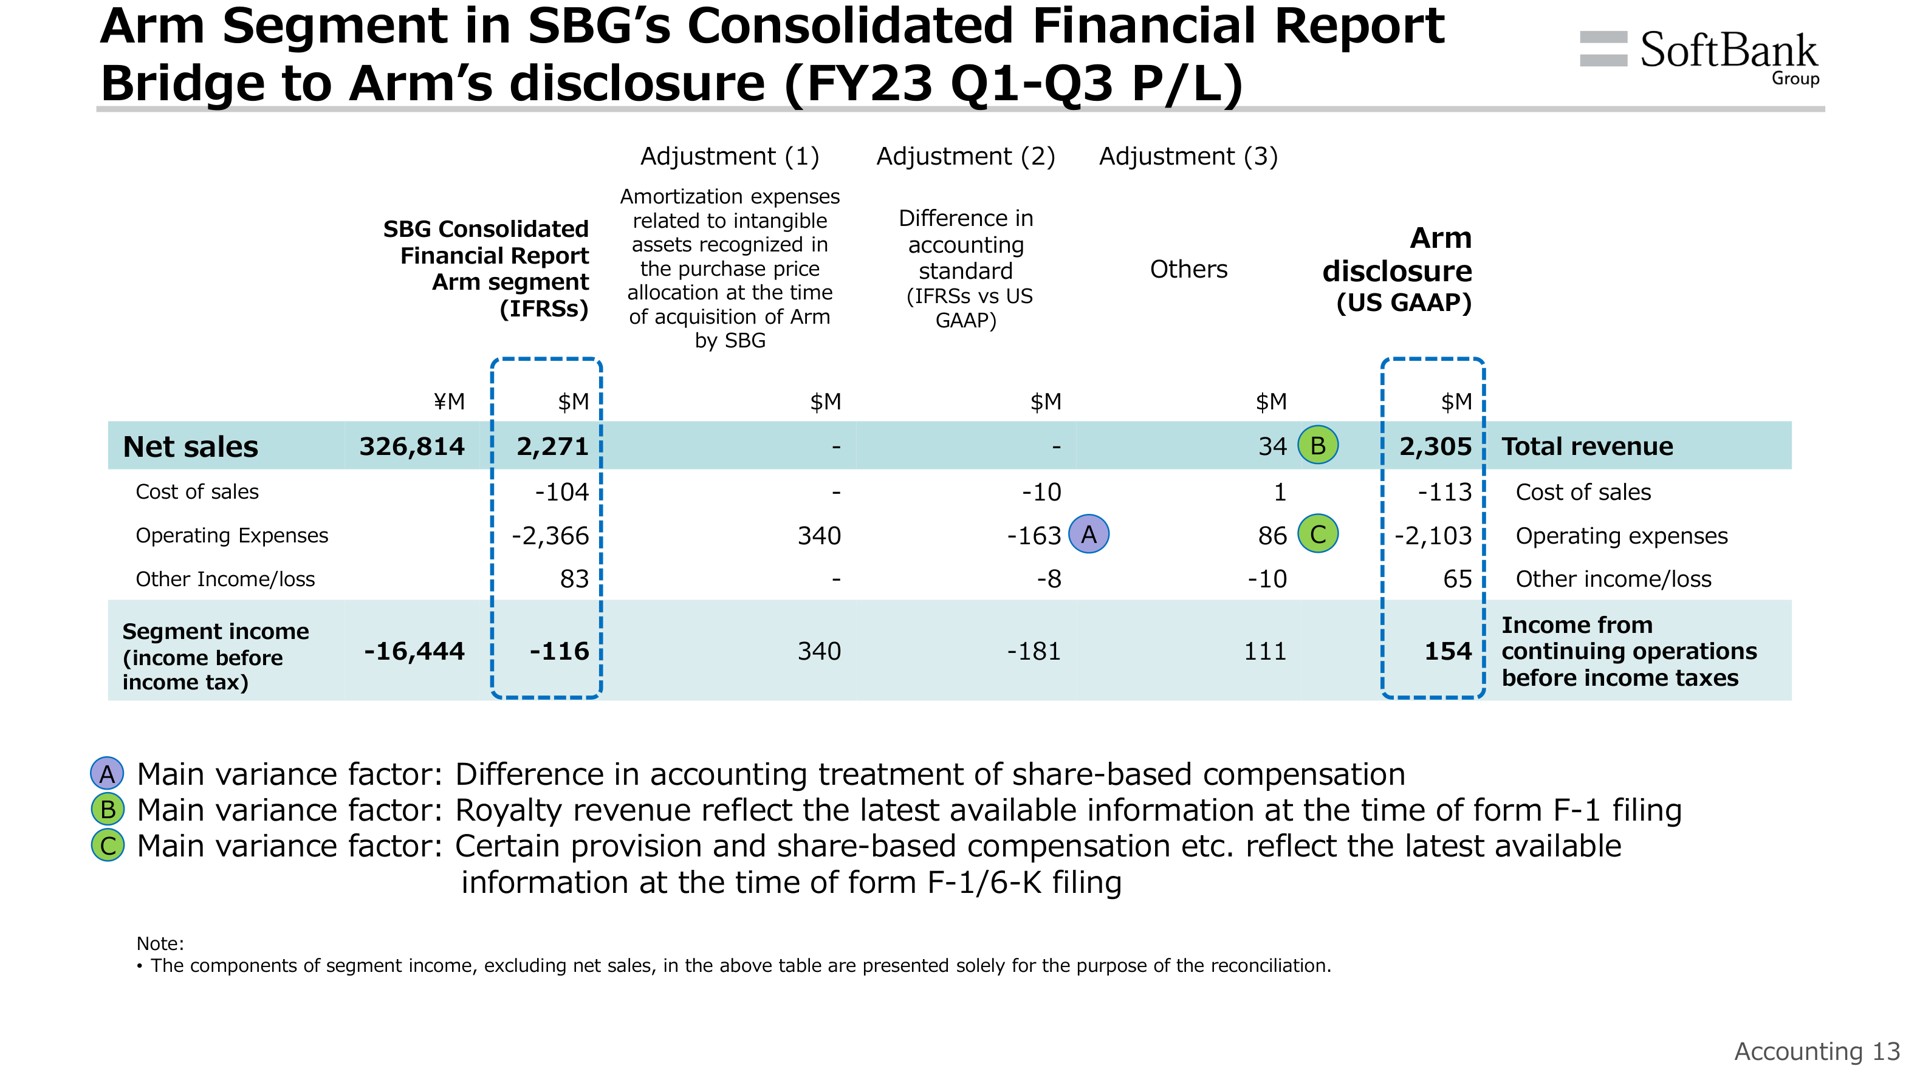 arm segment in consolidated financial report bridge to arm disclosure | SoftBank